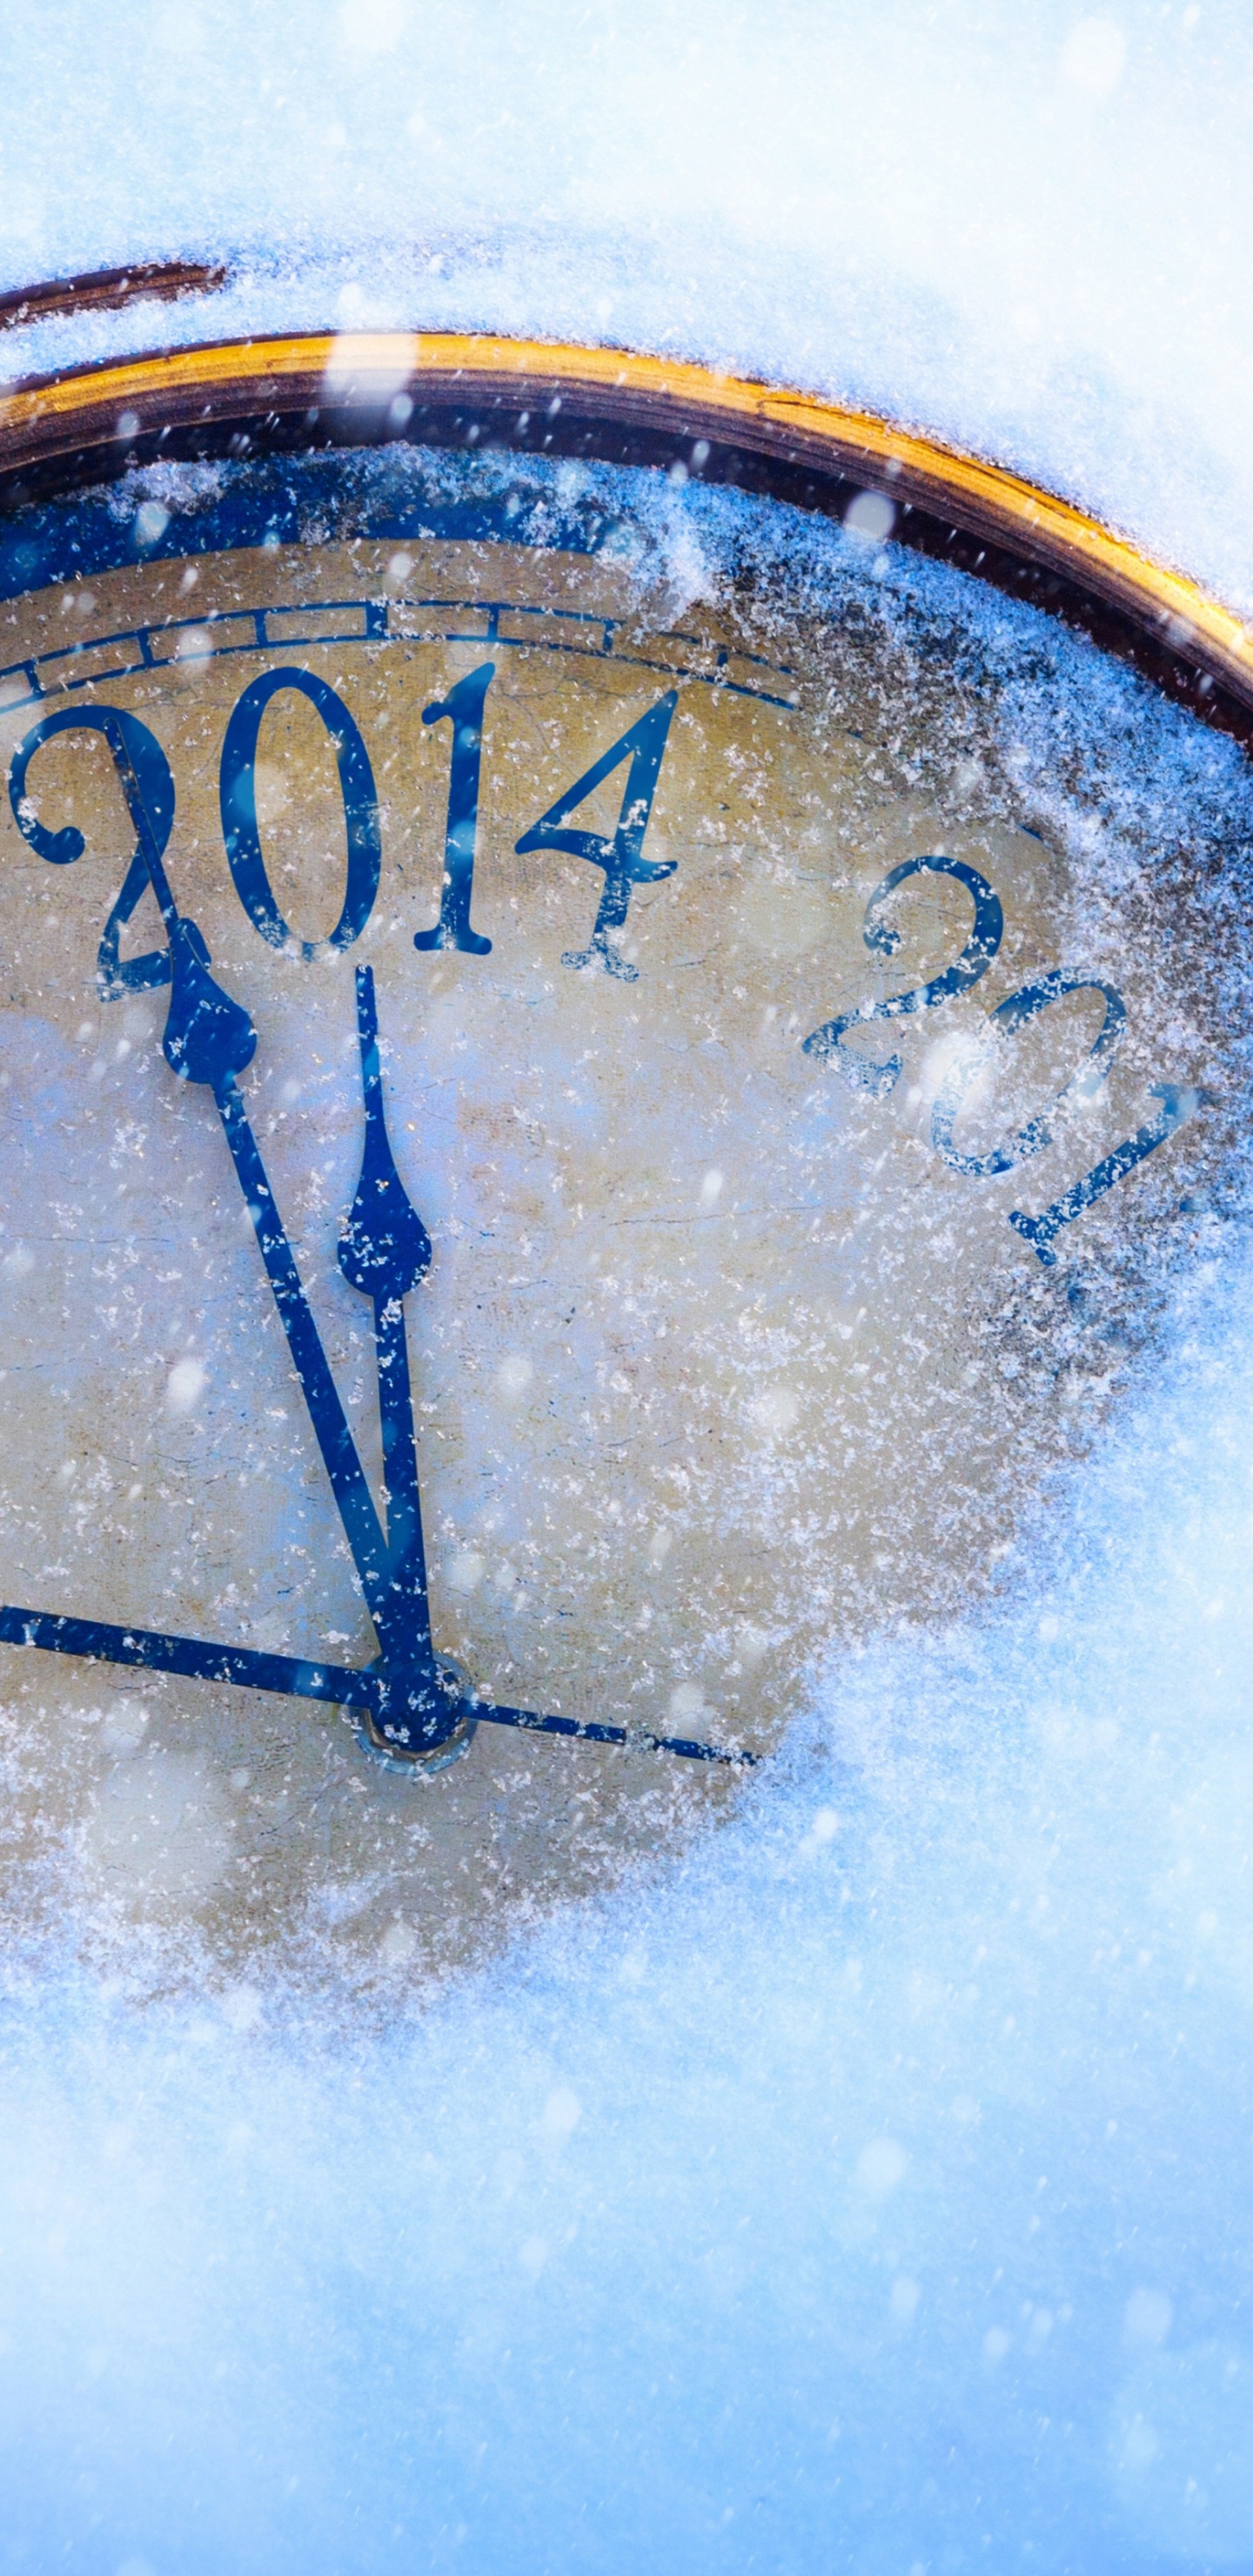 A Few Minutes To The New Year 2014